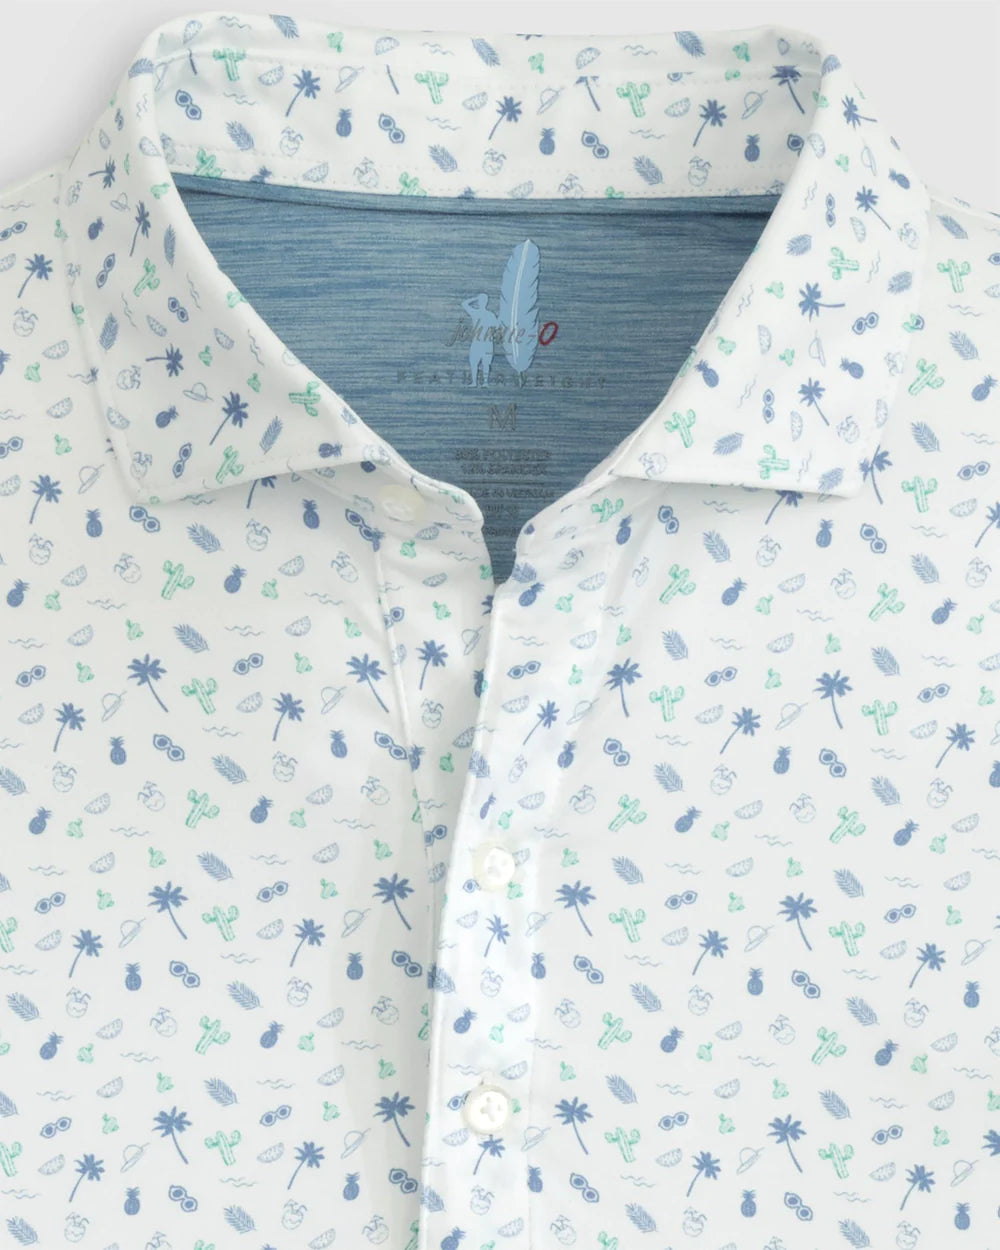 Oceano Printed Featherweight Performance Polo